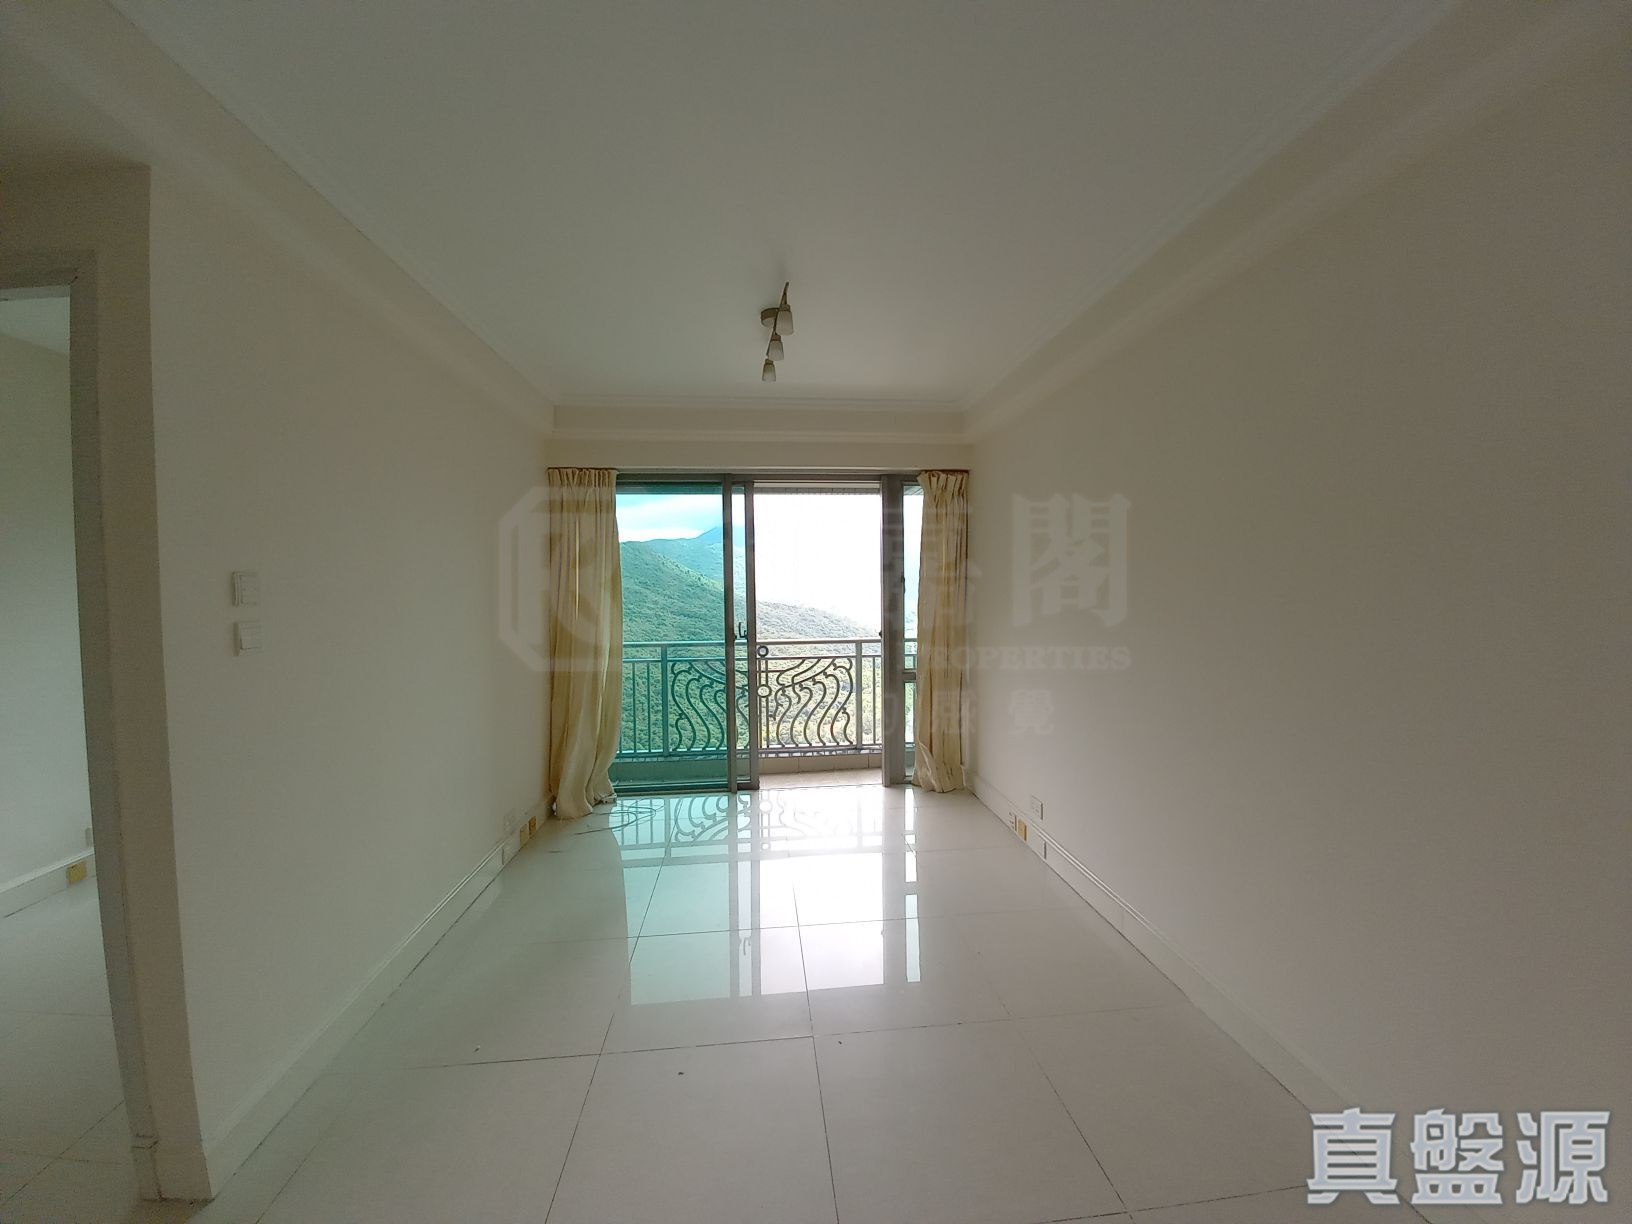 [RC GINNY] Yingwan two-bedroom rent high-rise open view